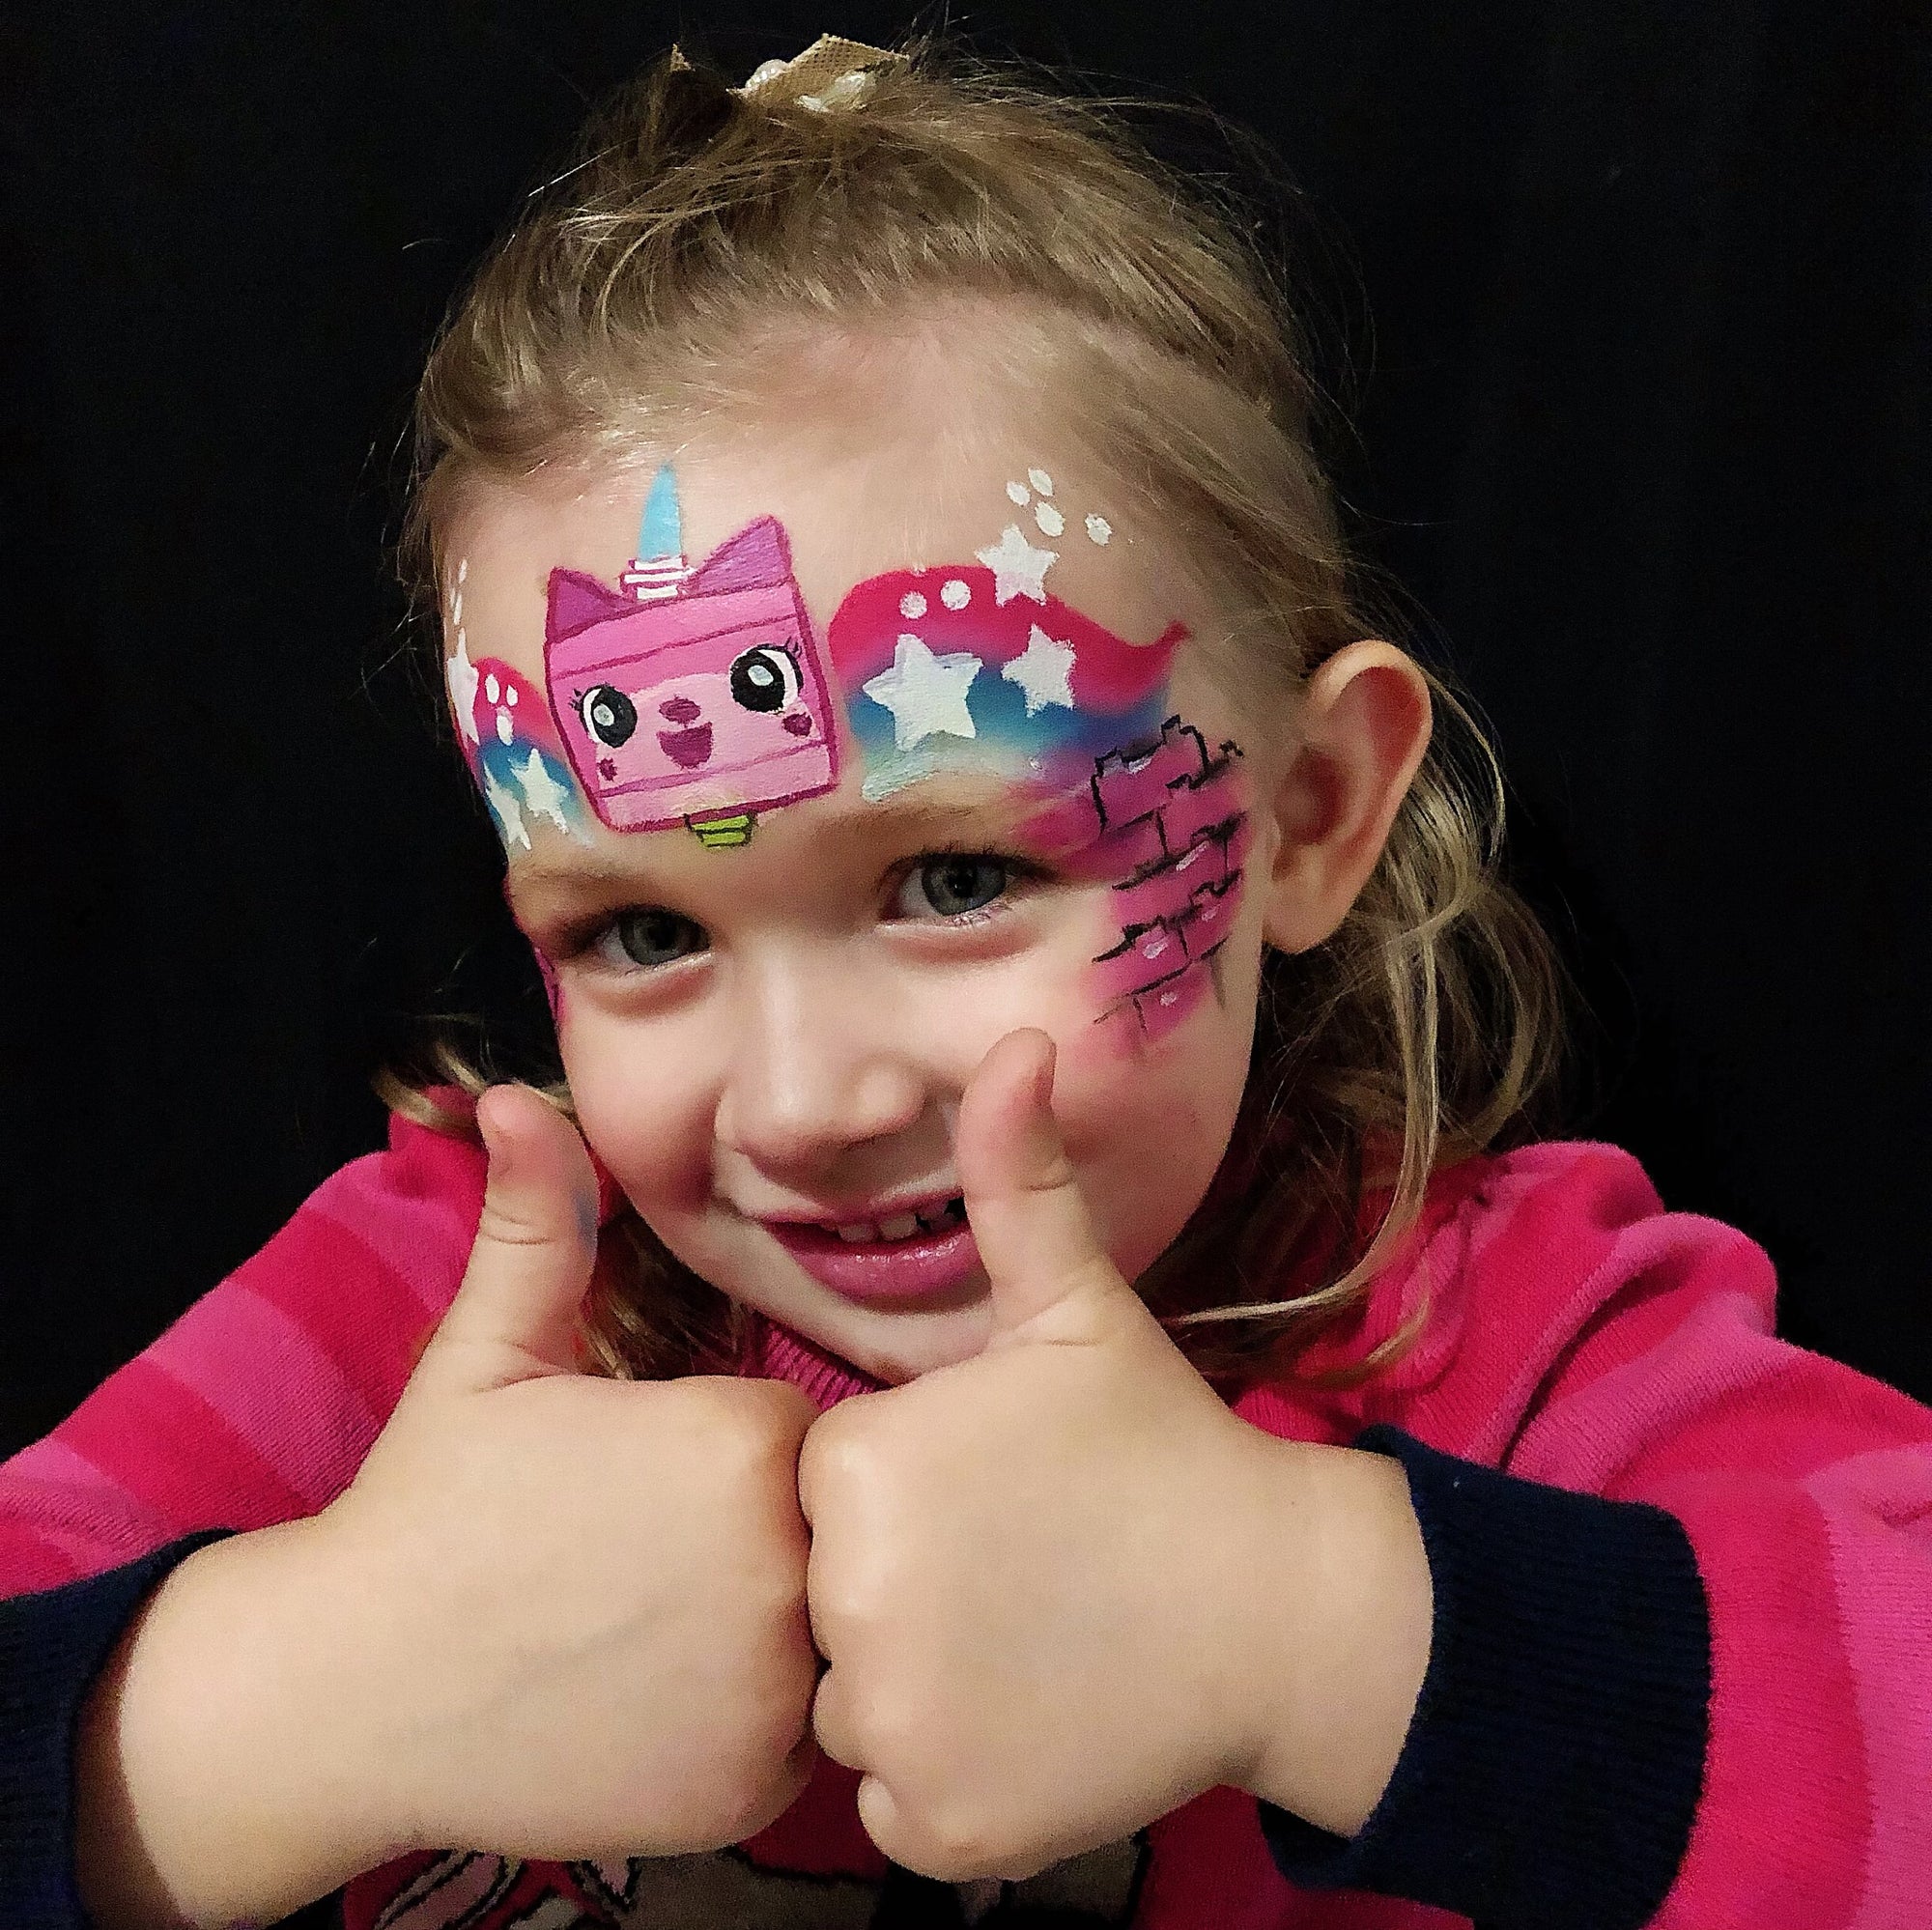 Lego Unikitty Face Paint Design for Little Squiggles by Marina